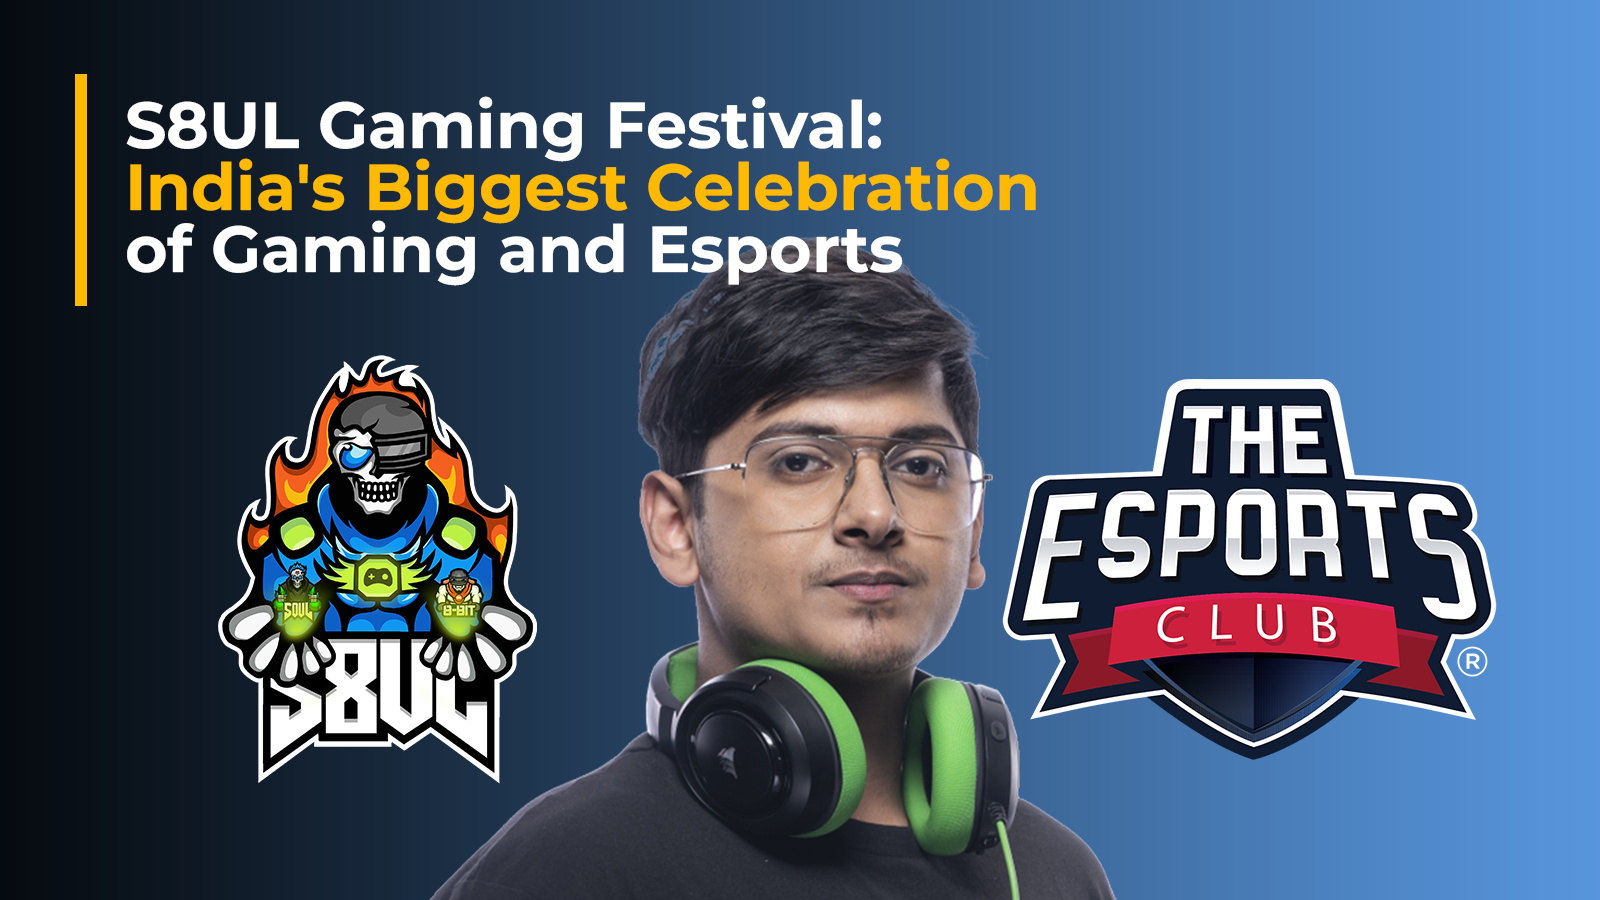 S8UL Gaming Festival: India’s Biggest Celebration of Gaming and Esports